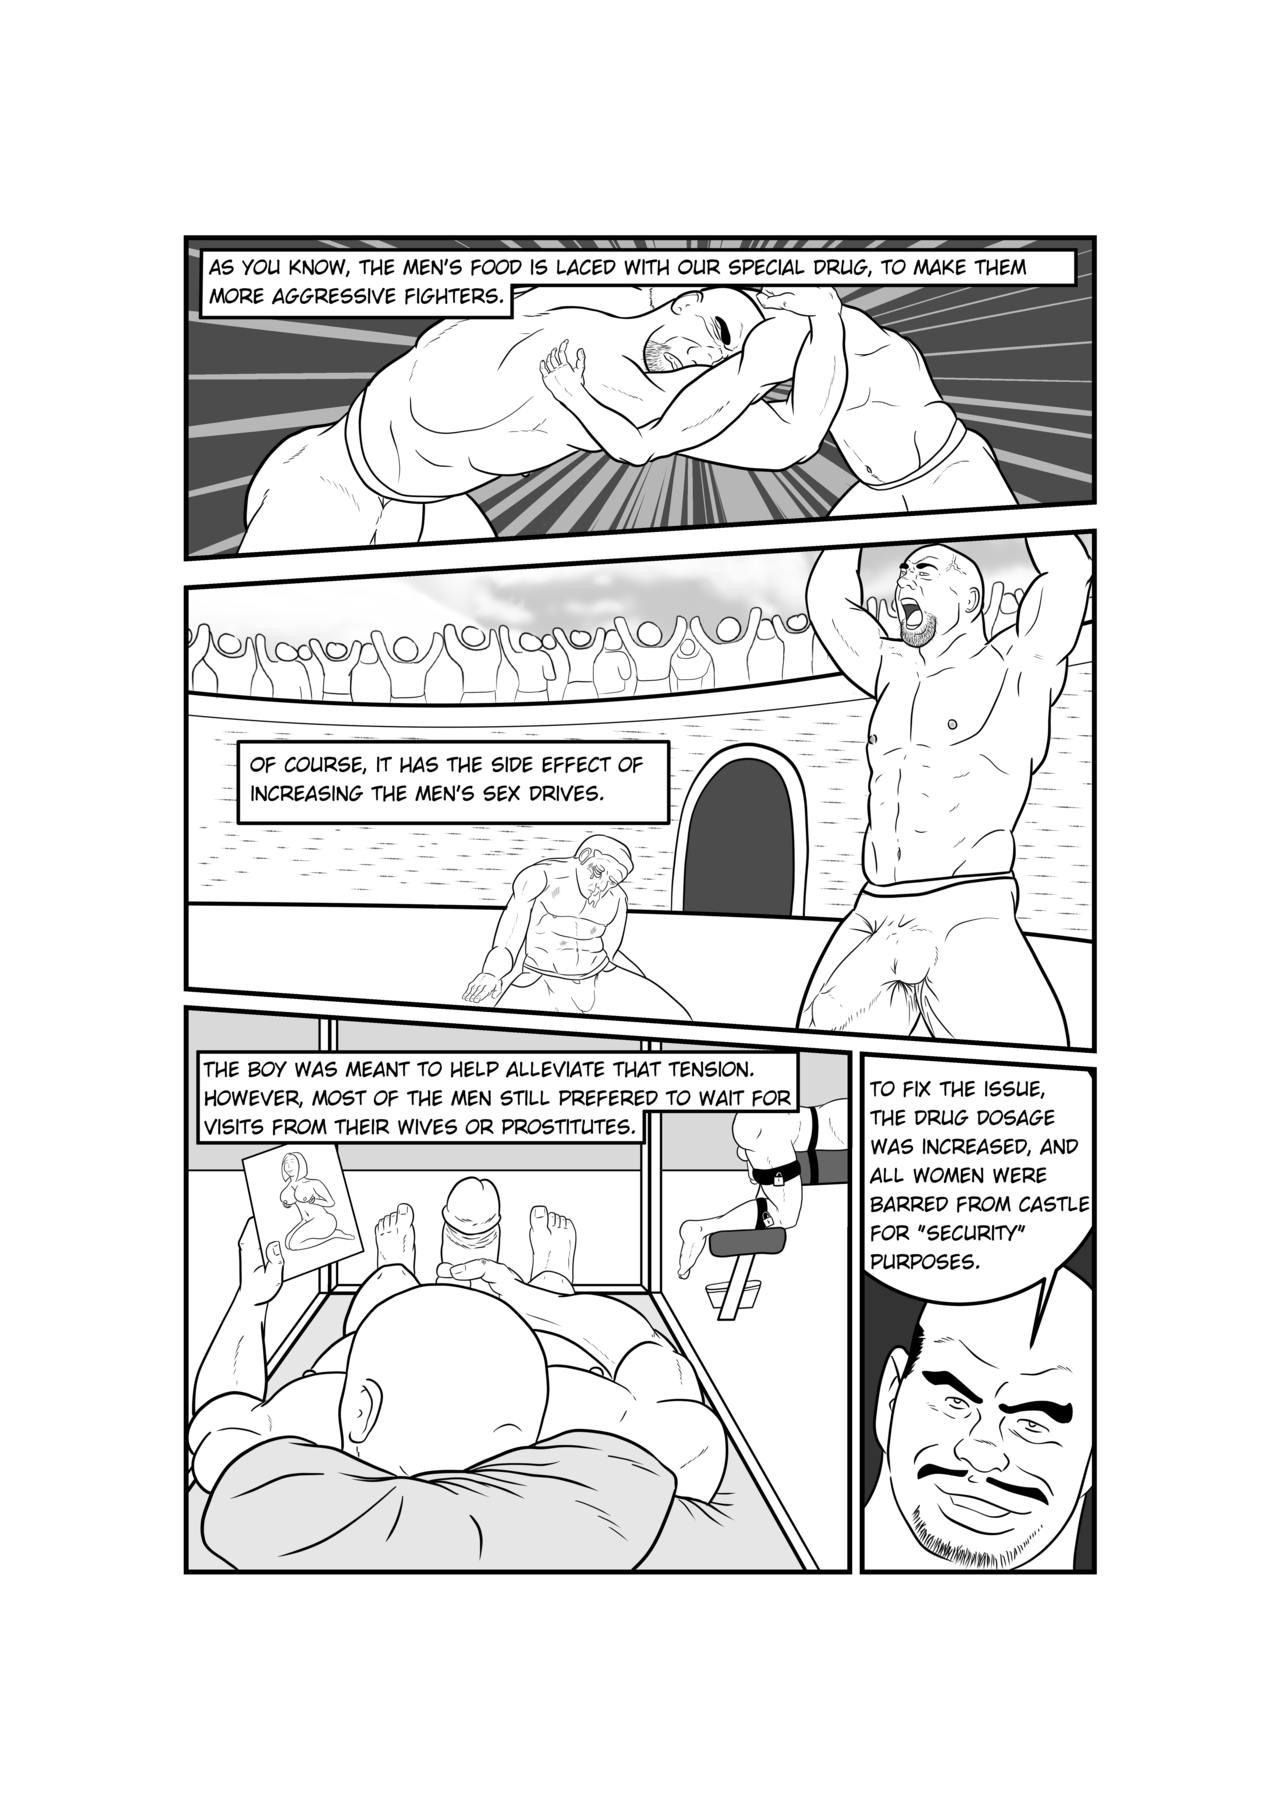 Horny Slut Father and Son in Hell - Unauthorized Fan Comic - Original Facebook - Page 3